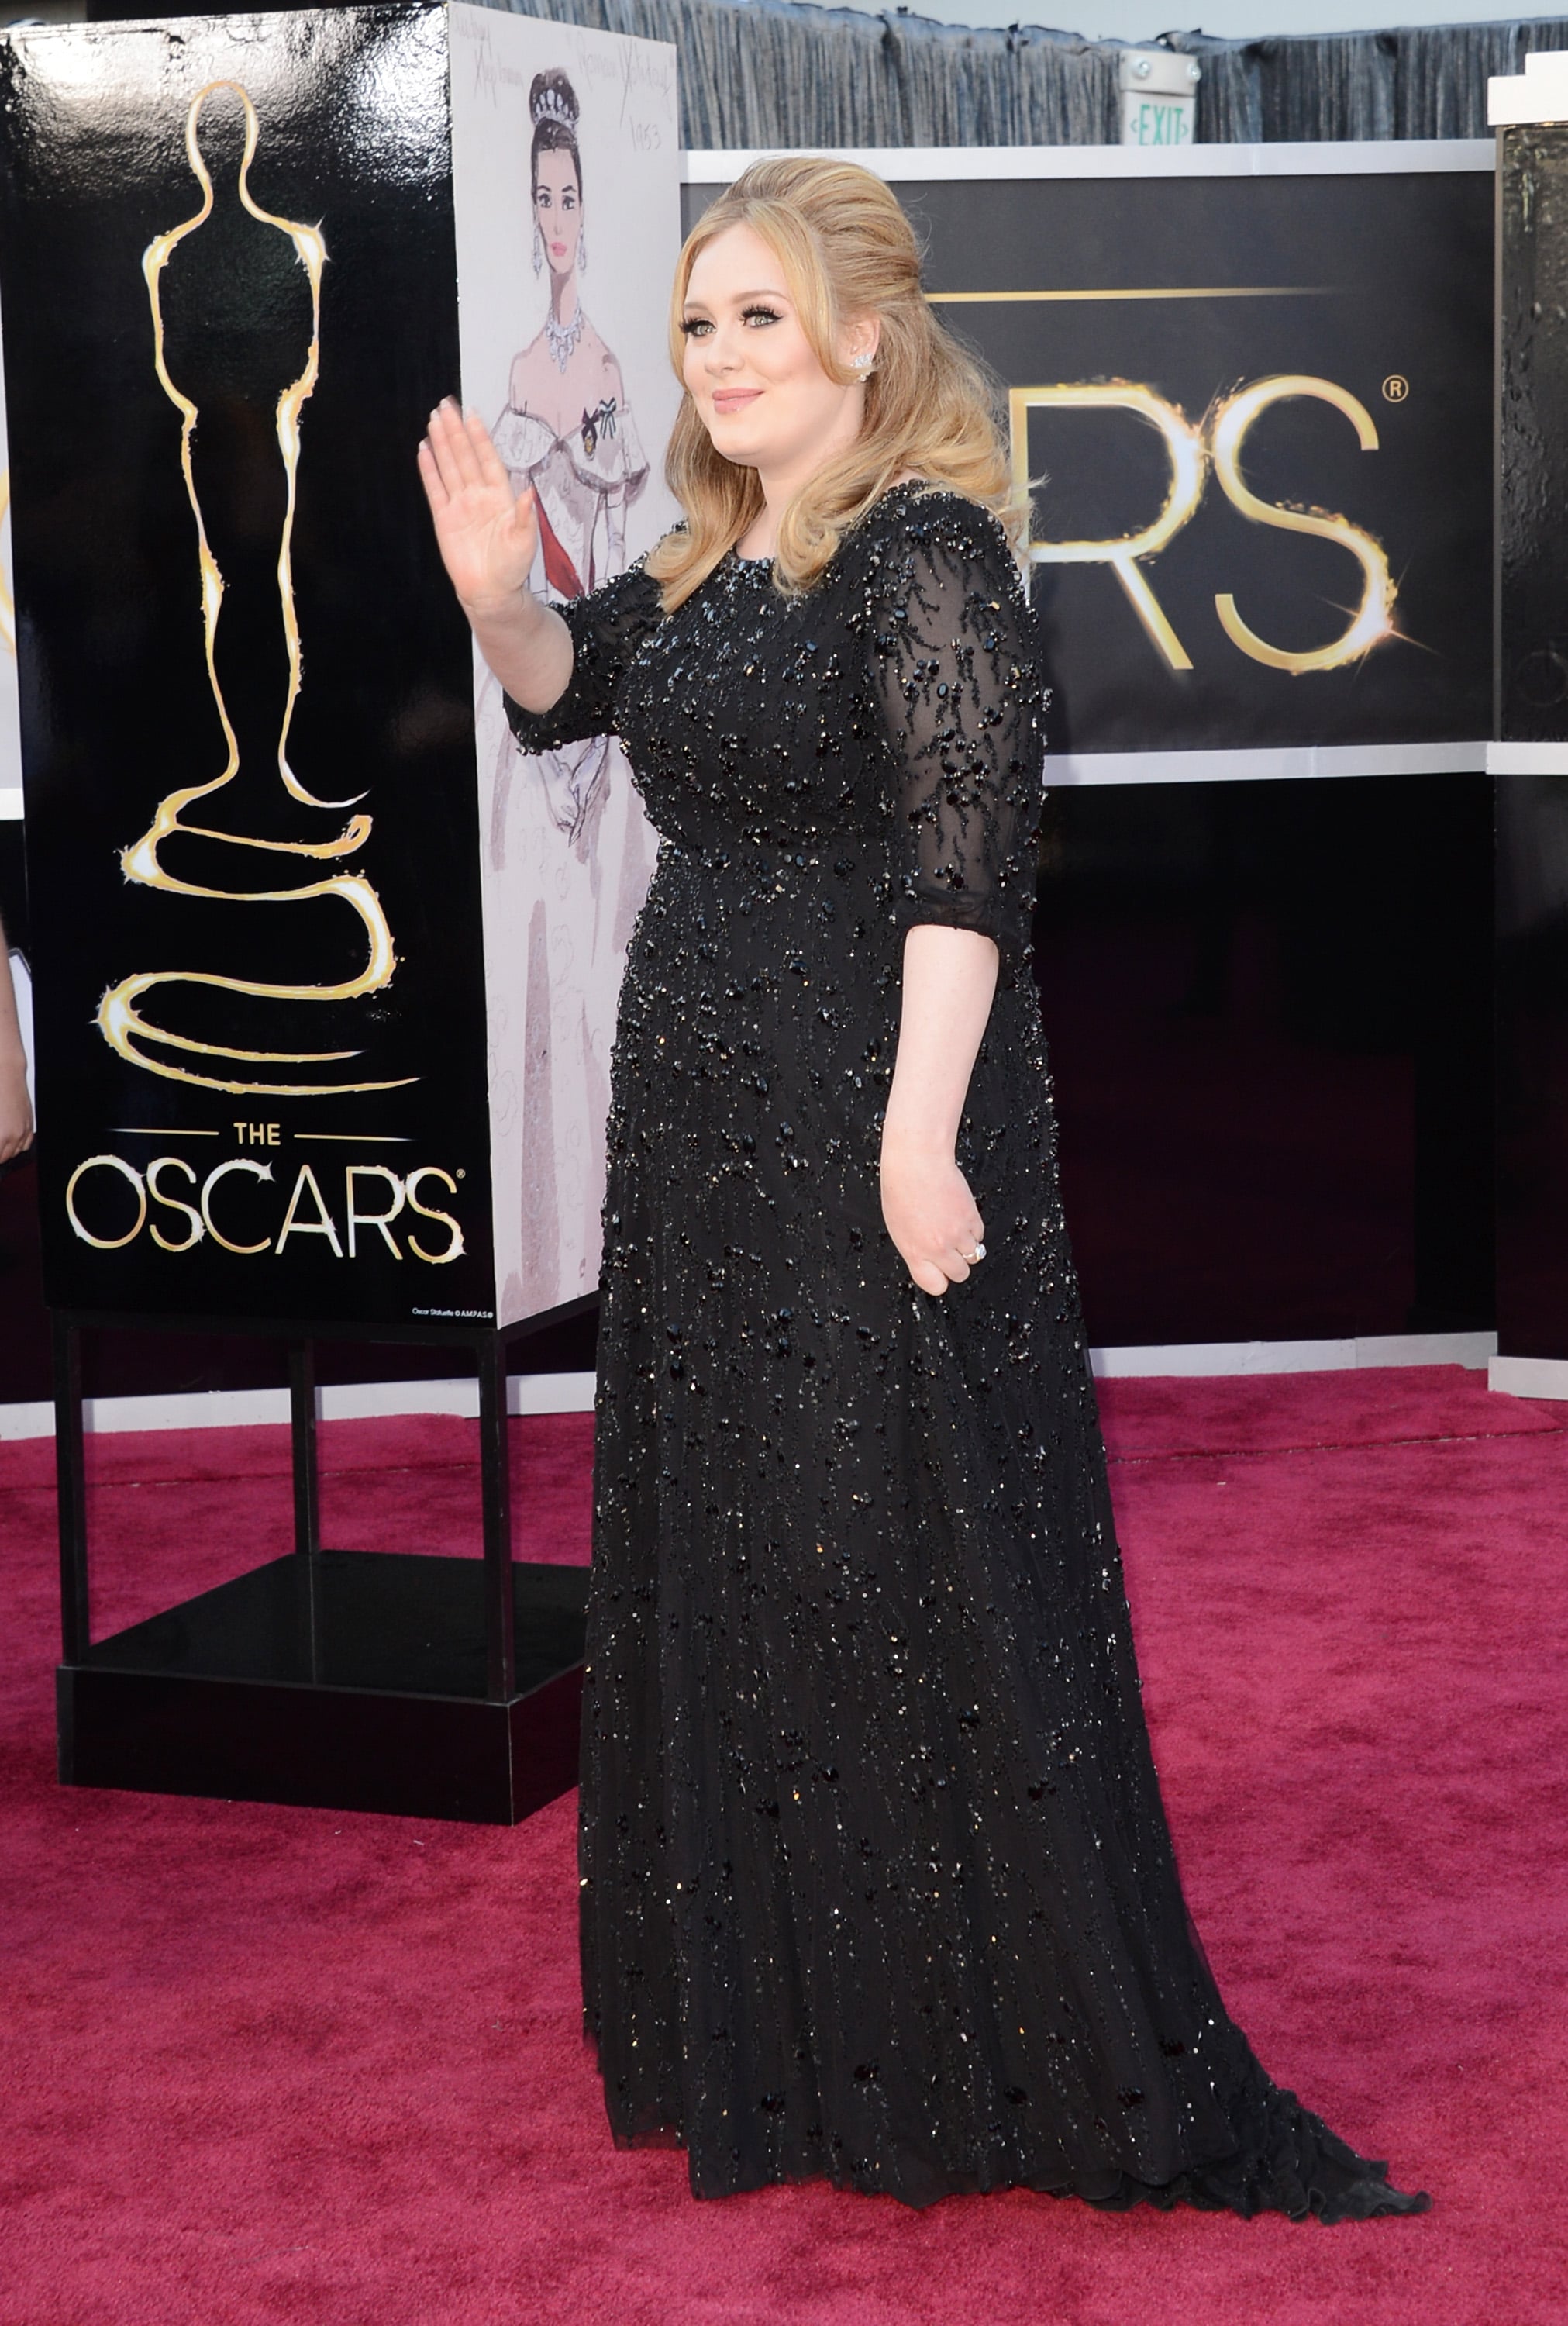 Adele on the red carpet at the Oscars 2013. | The Ultimate ...